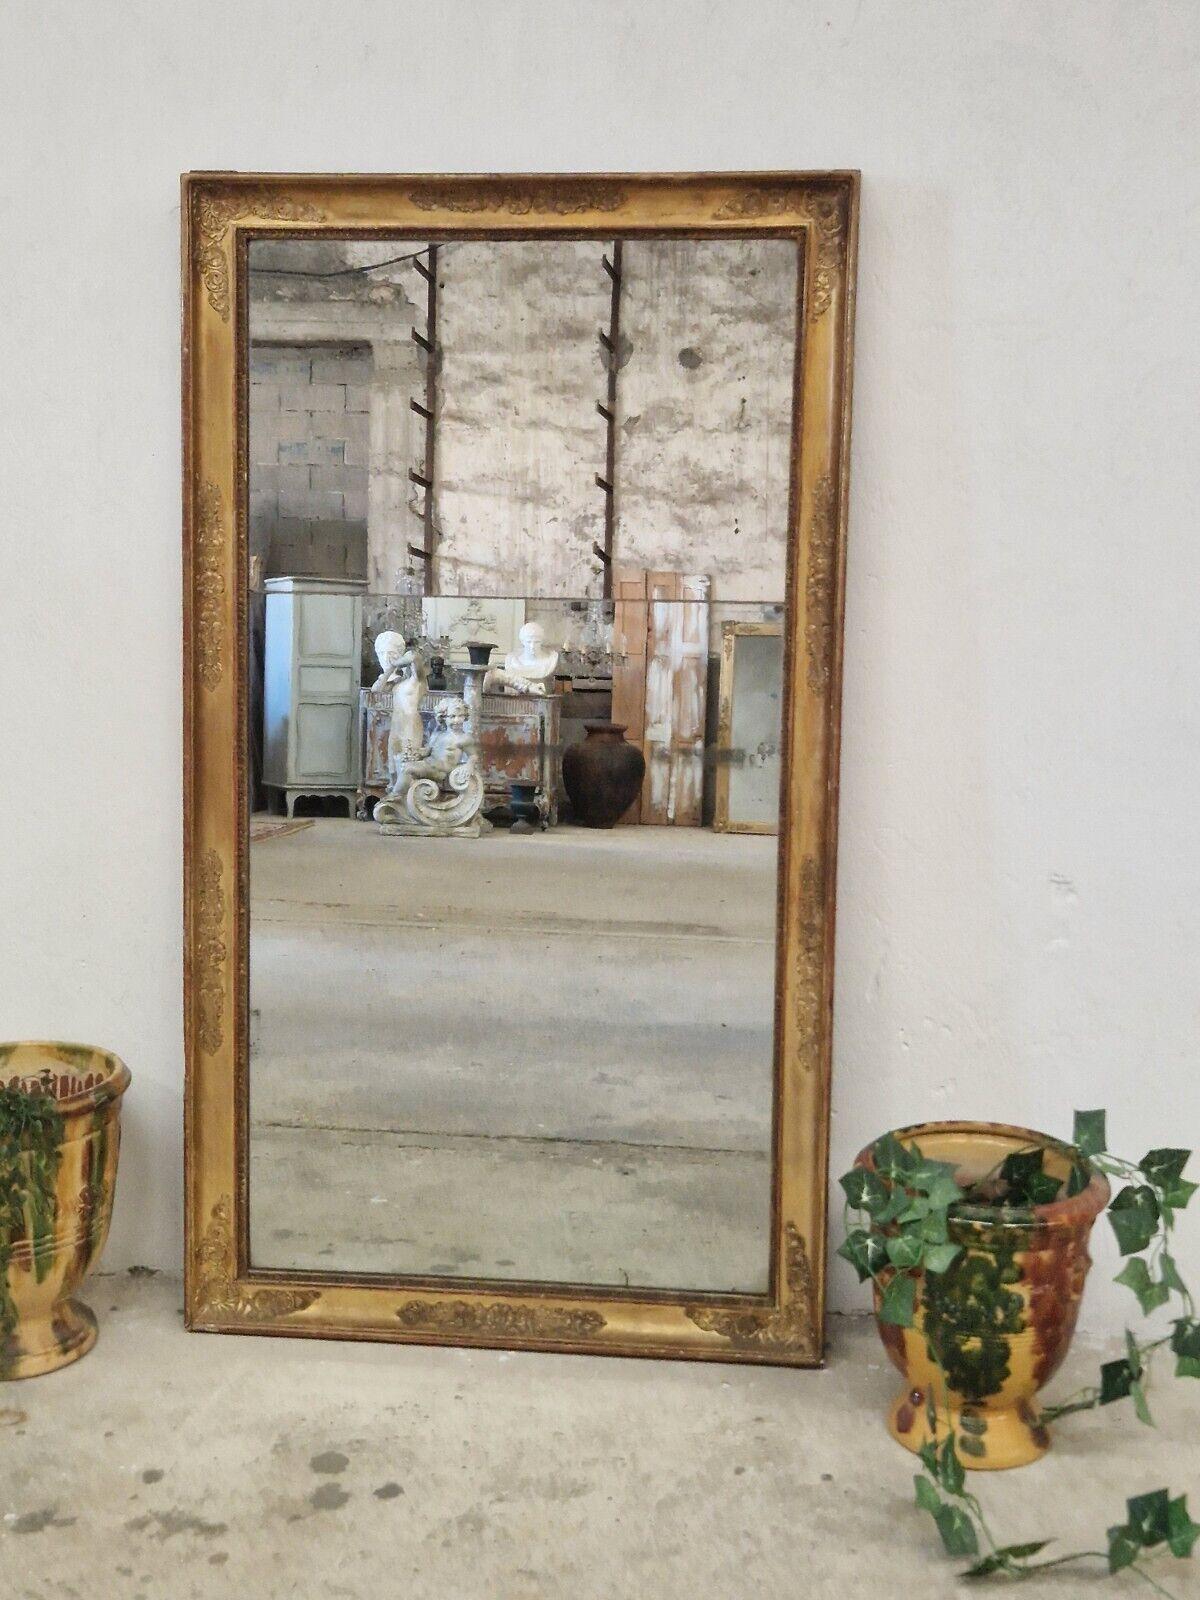 Molded Large Early 19th Century French Mirror Regency Period Gilded